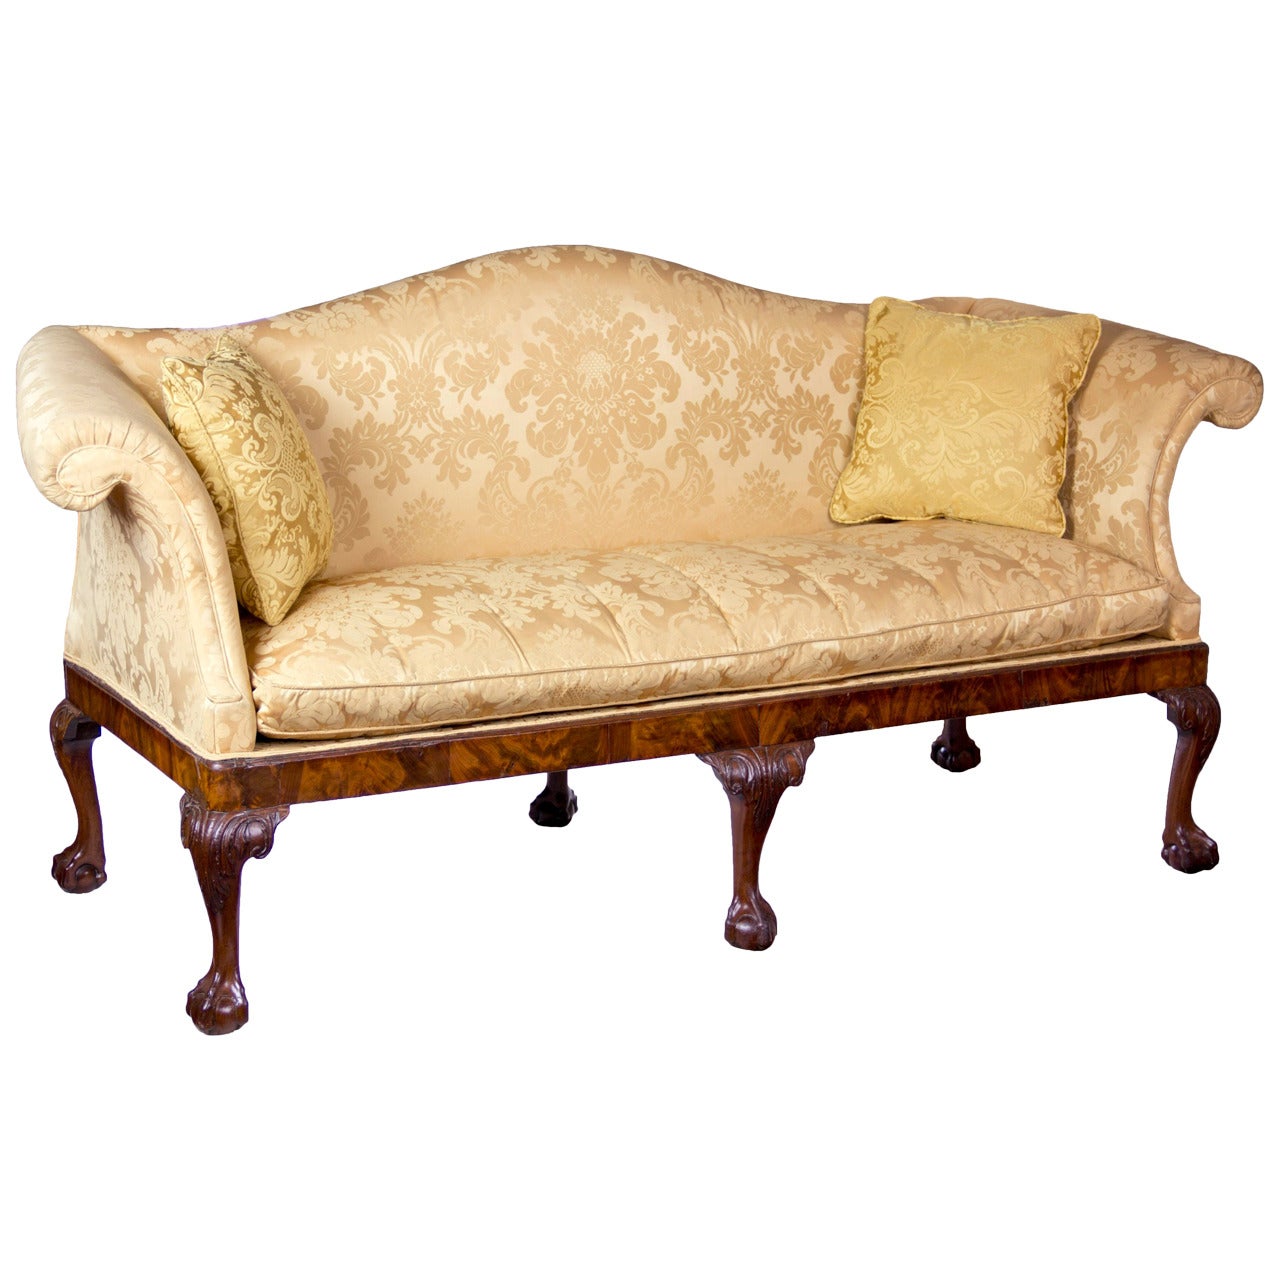 Chippendale Camelback Sofa with Claw and Ball Feet, English or Irish, circa 1770 For Sale